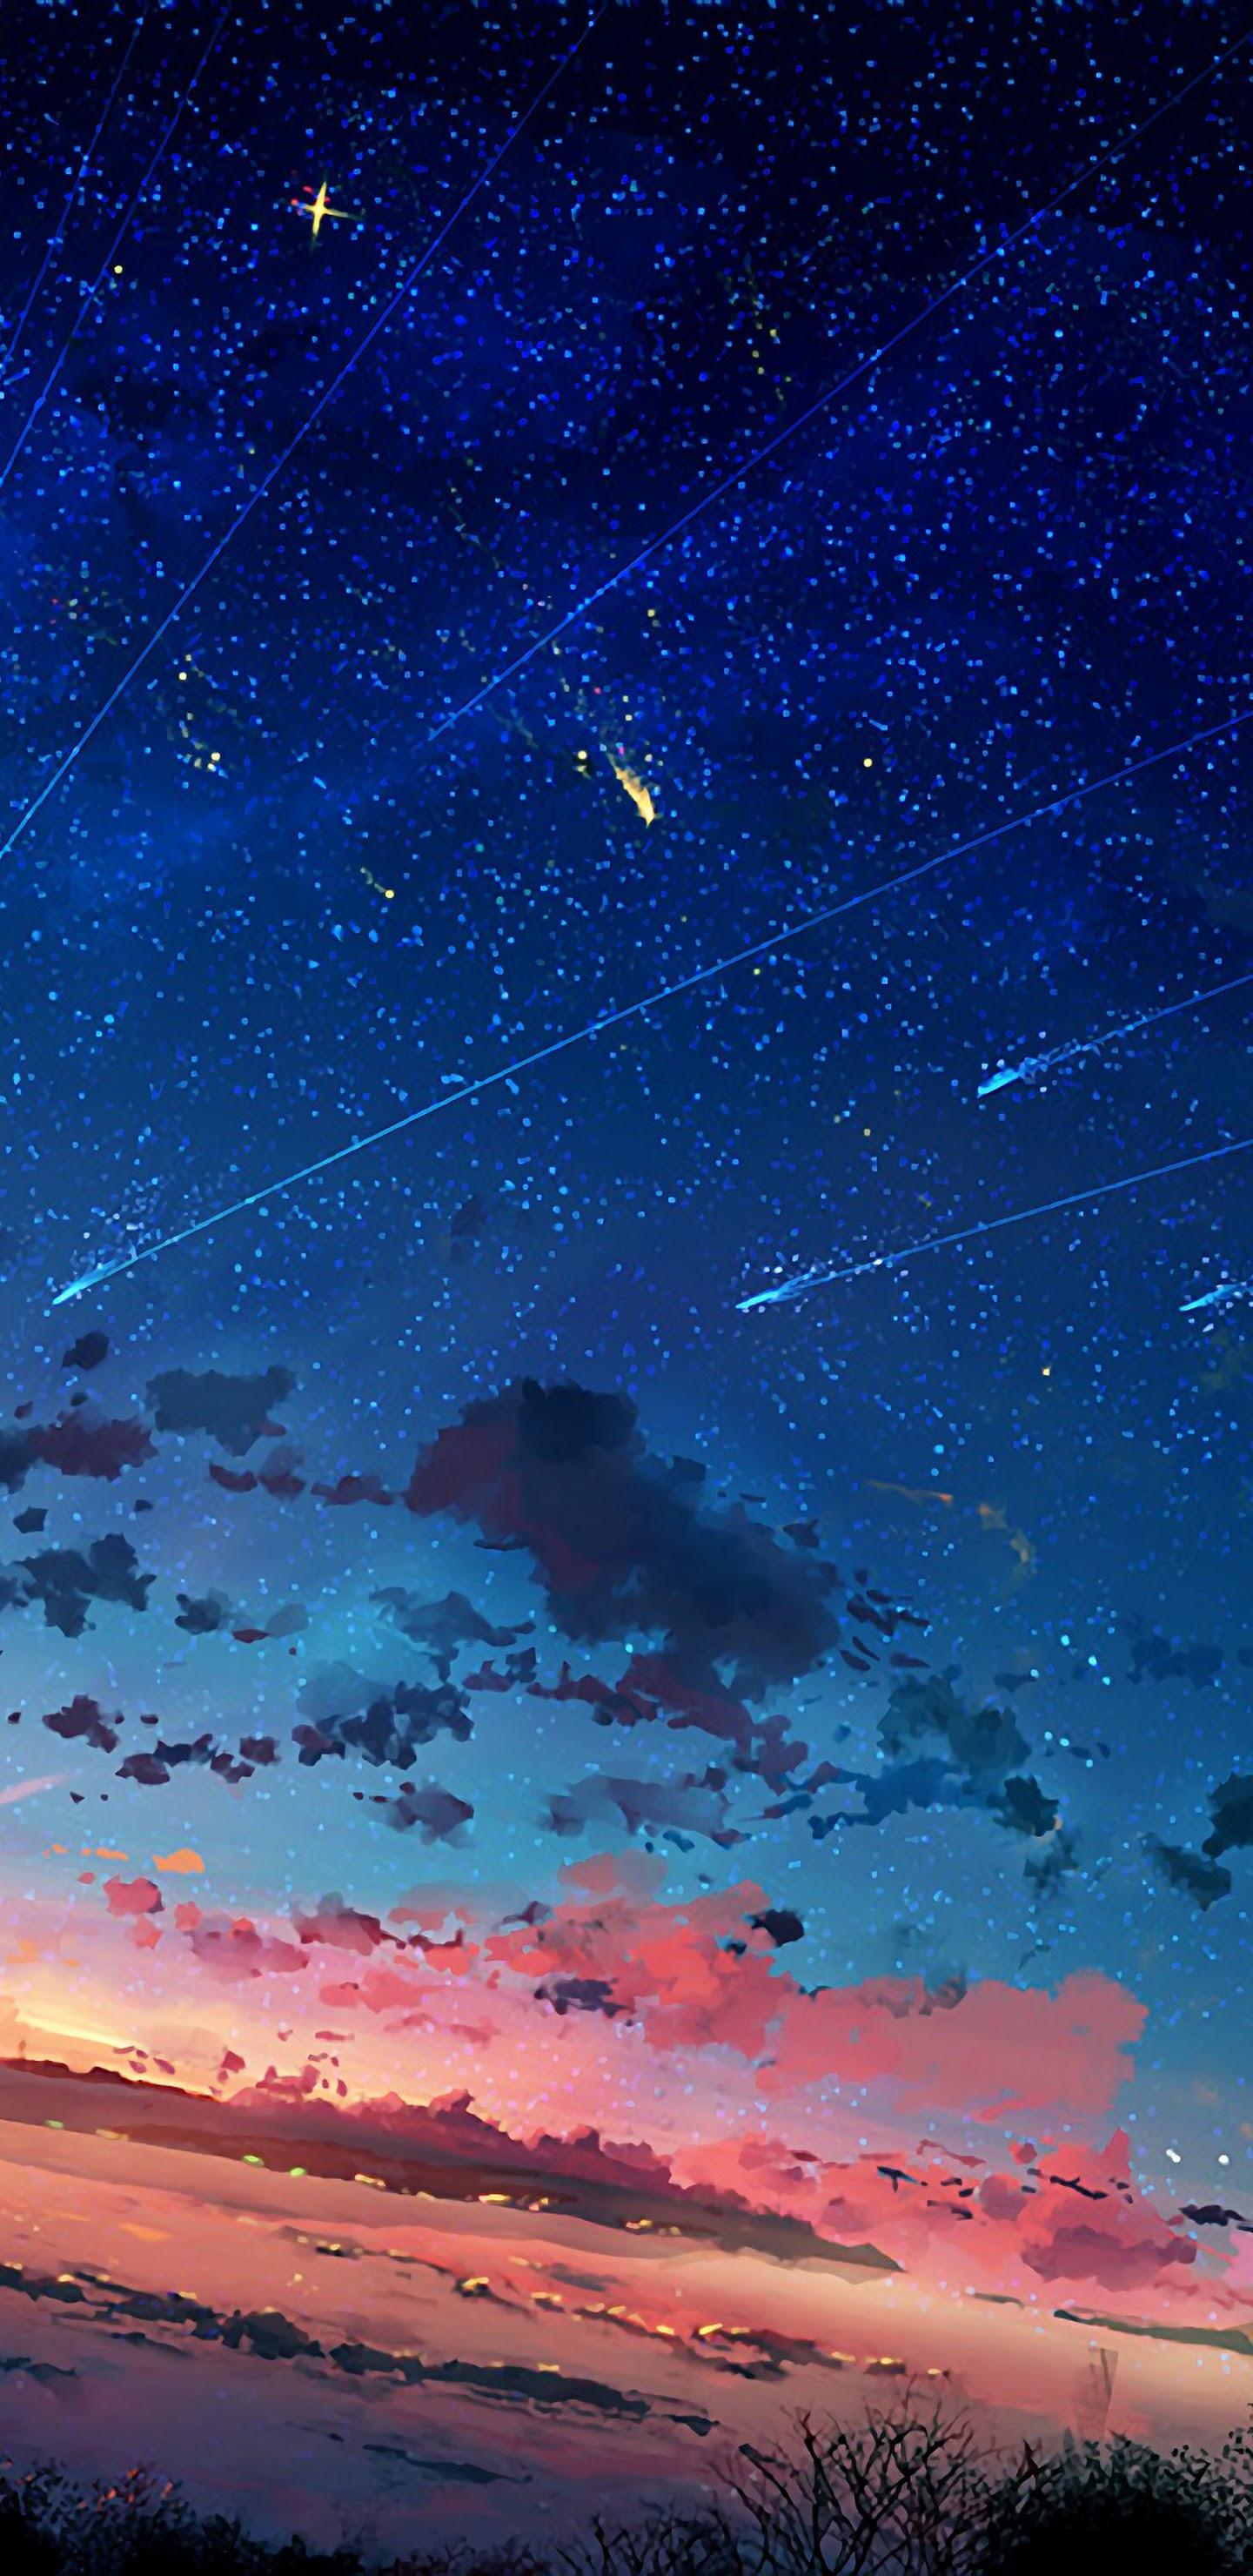 A sky with stars and clouds at night - Anime sunset